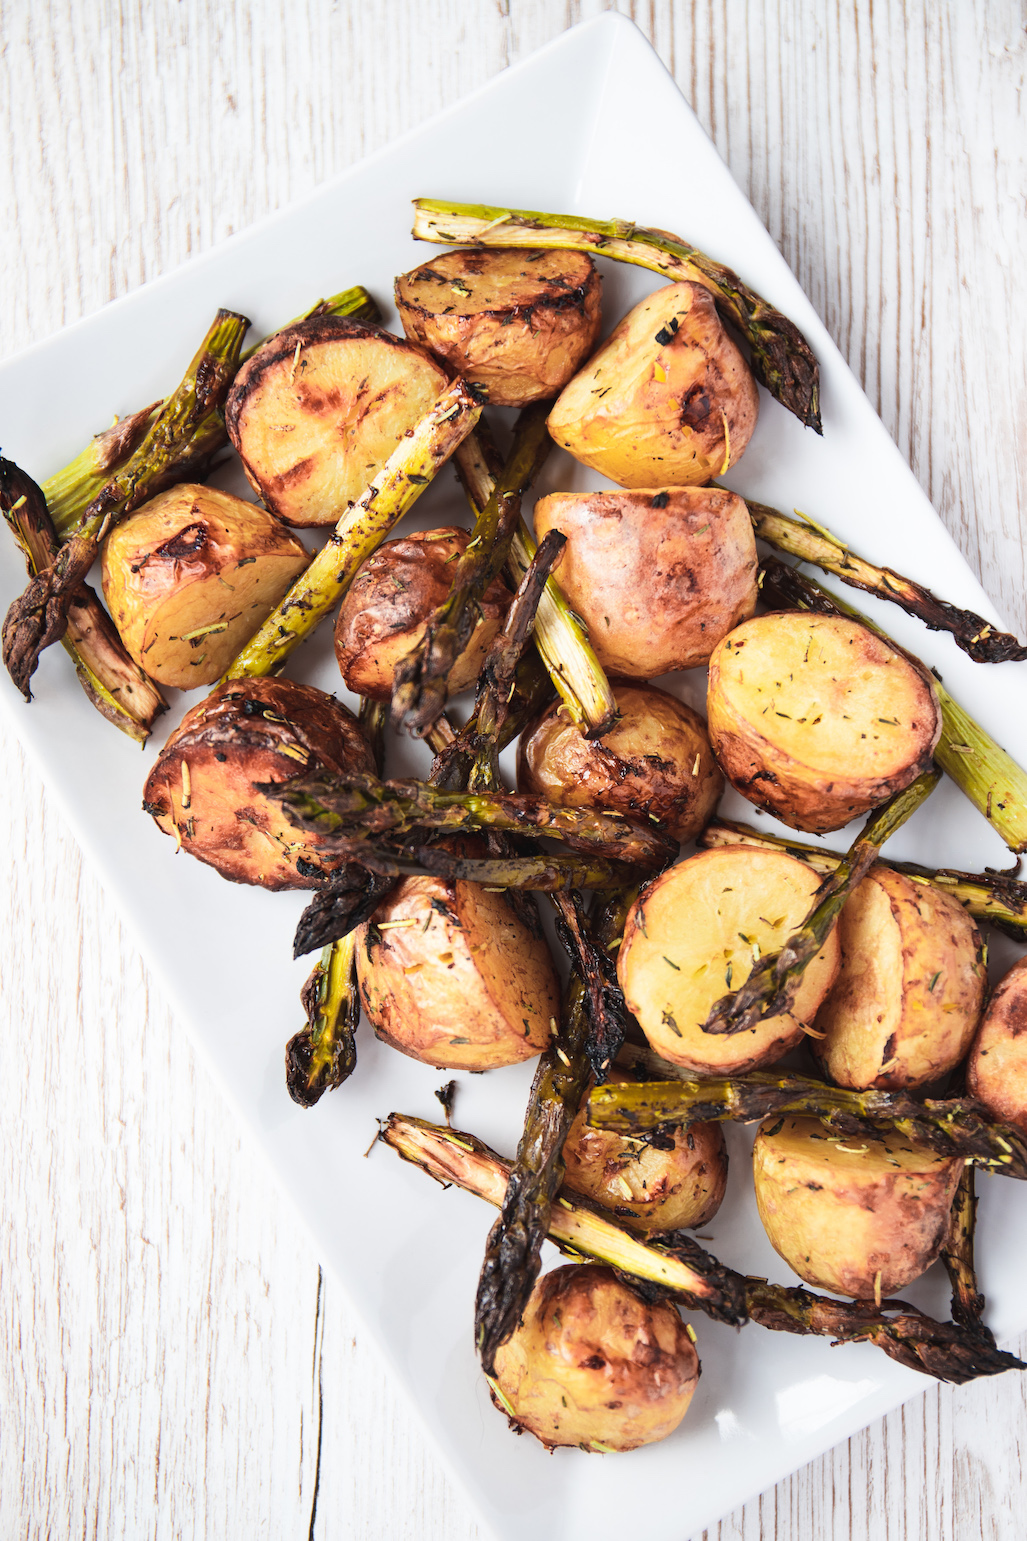 Balsamic roasted potatoes and asparagus on a plate